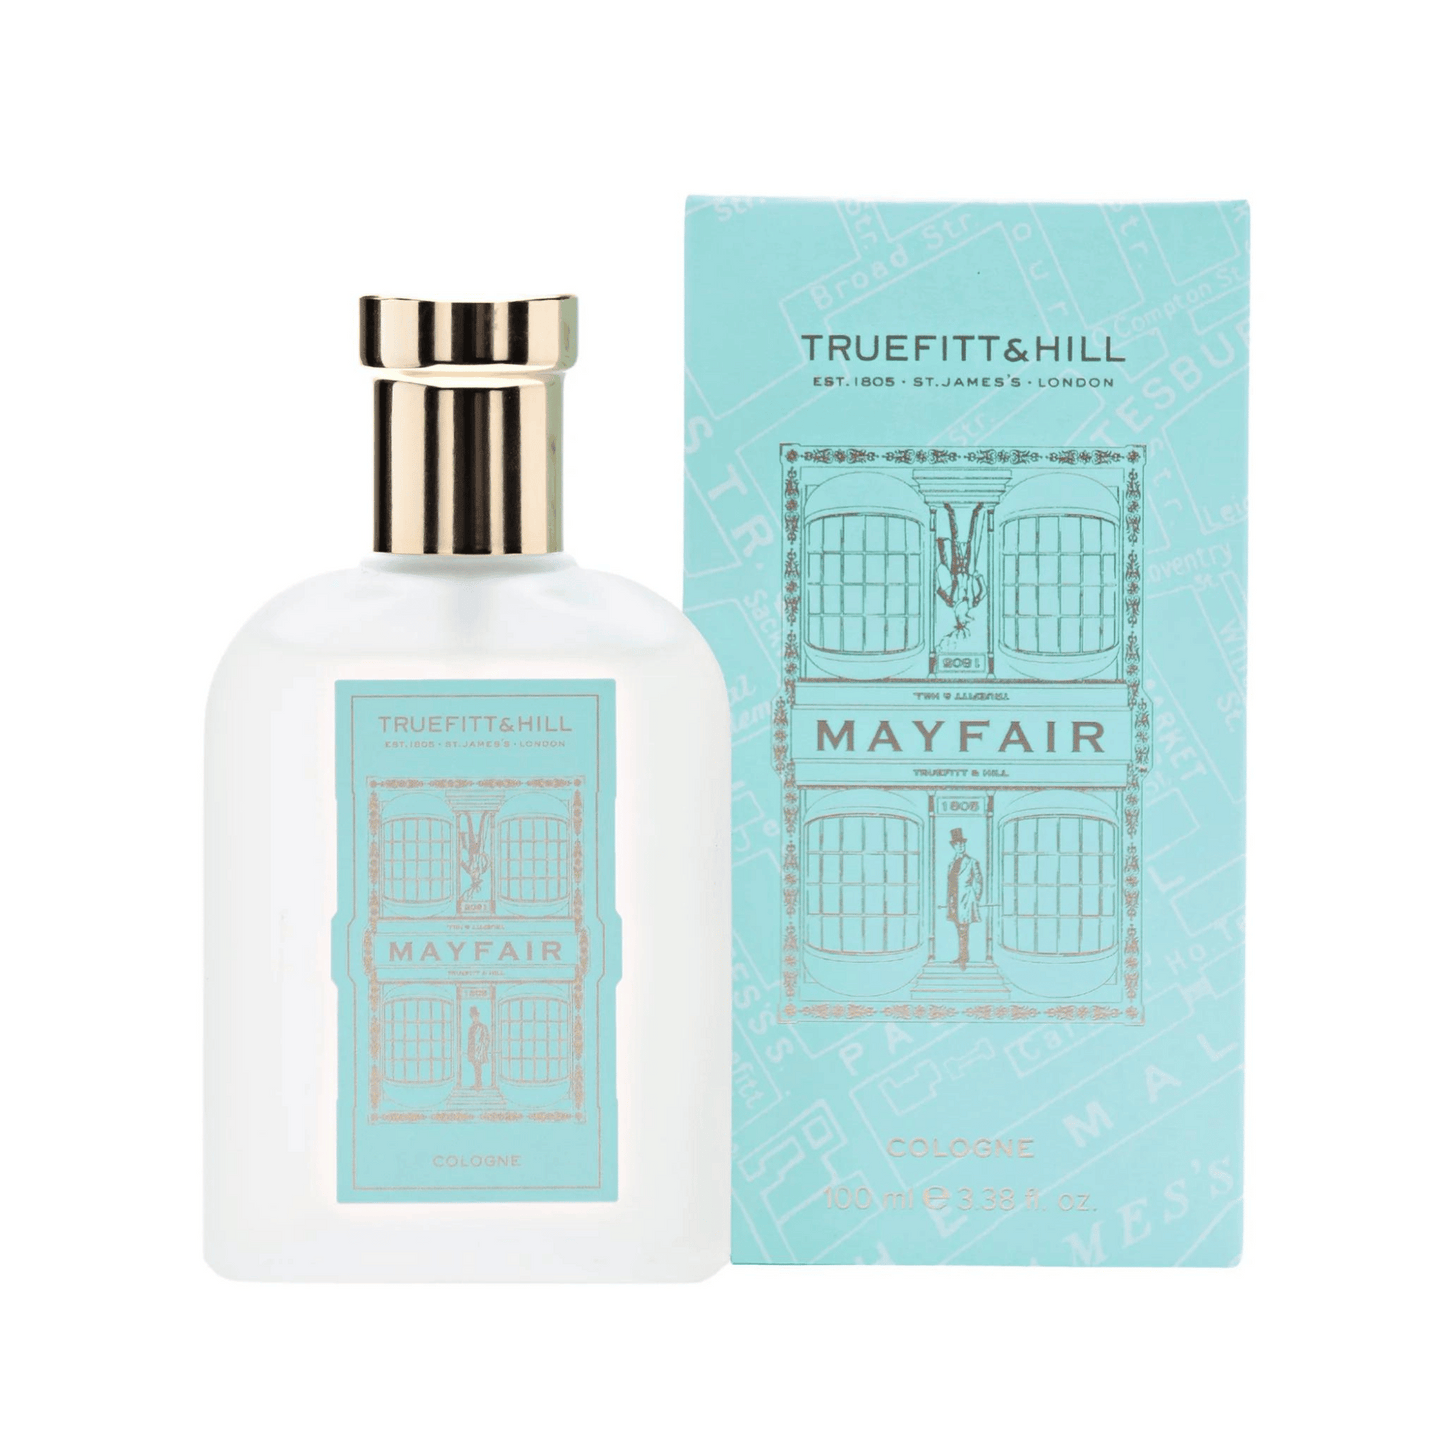 Primary Image of Mayfair Cologne